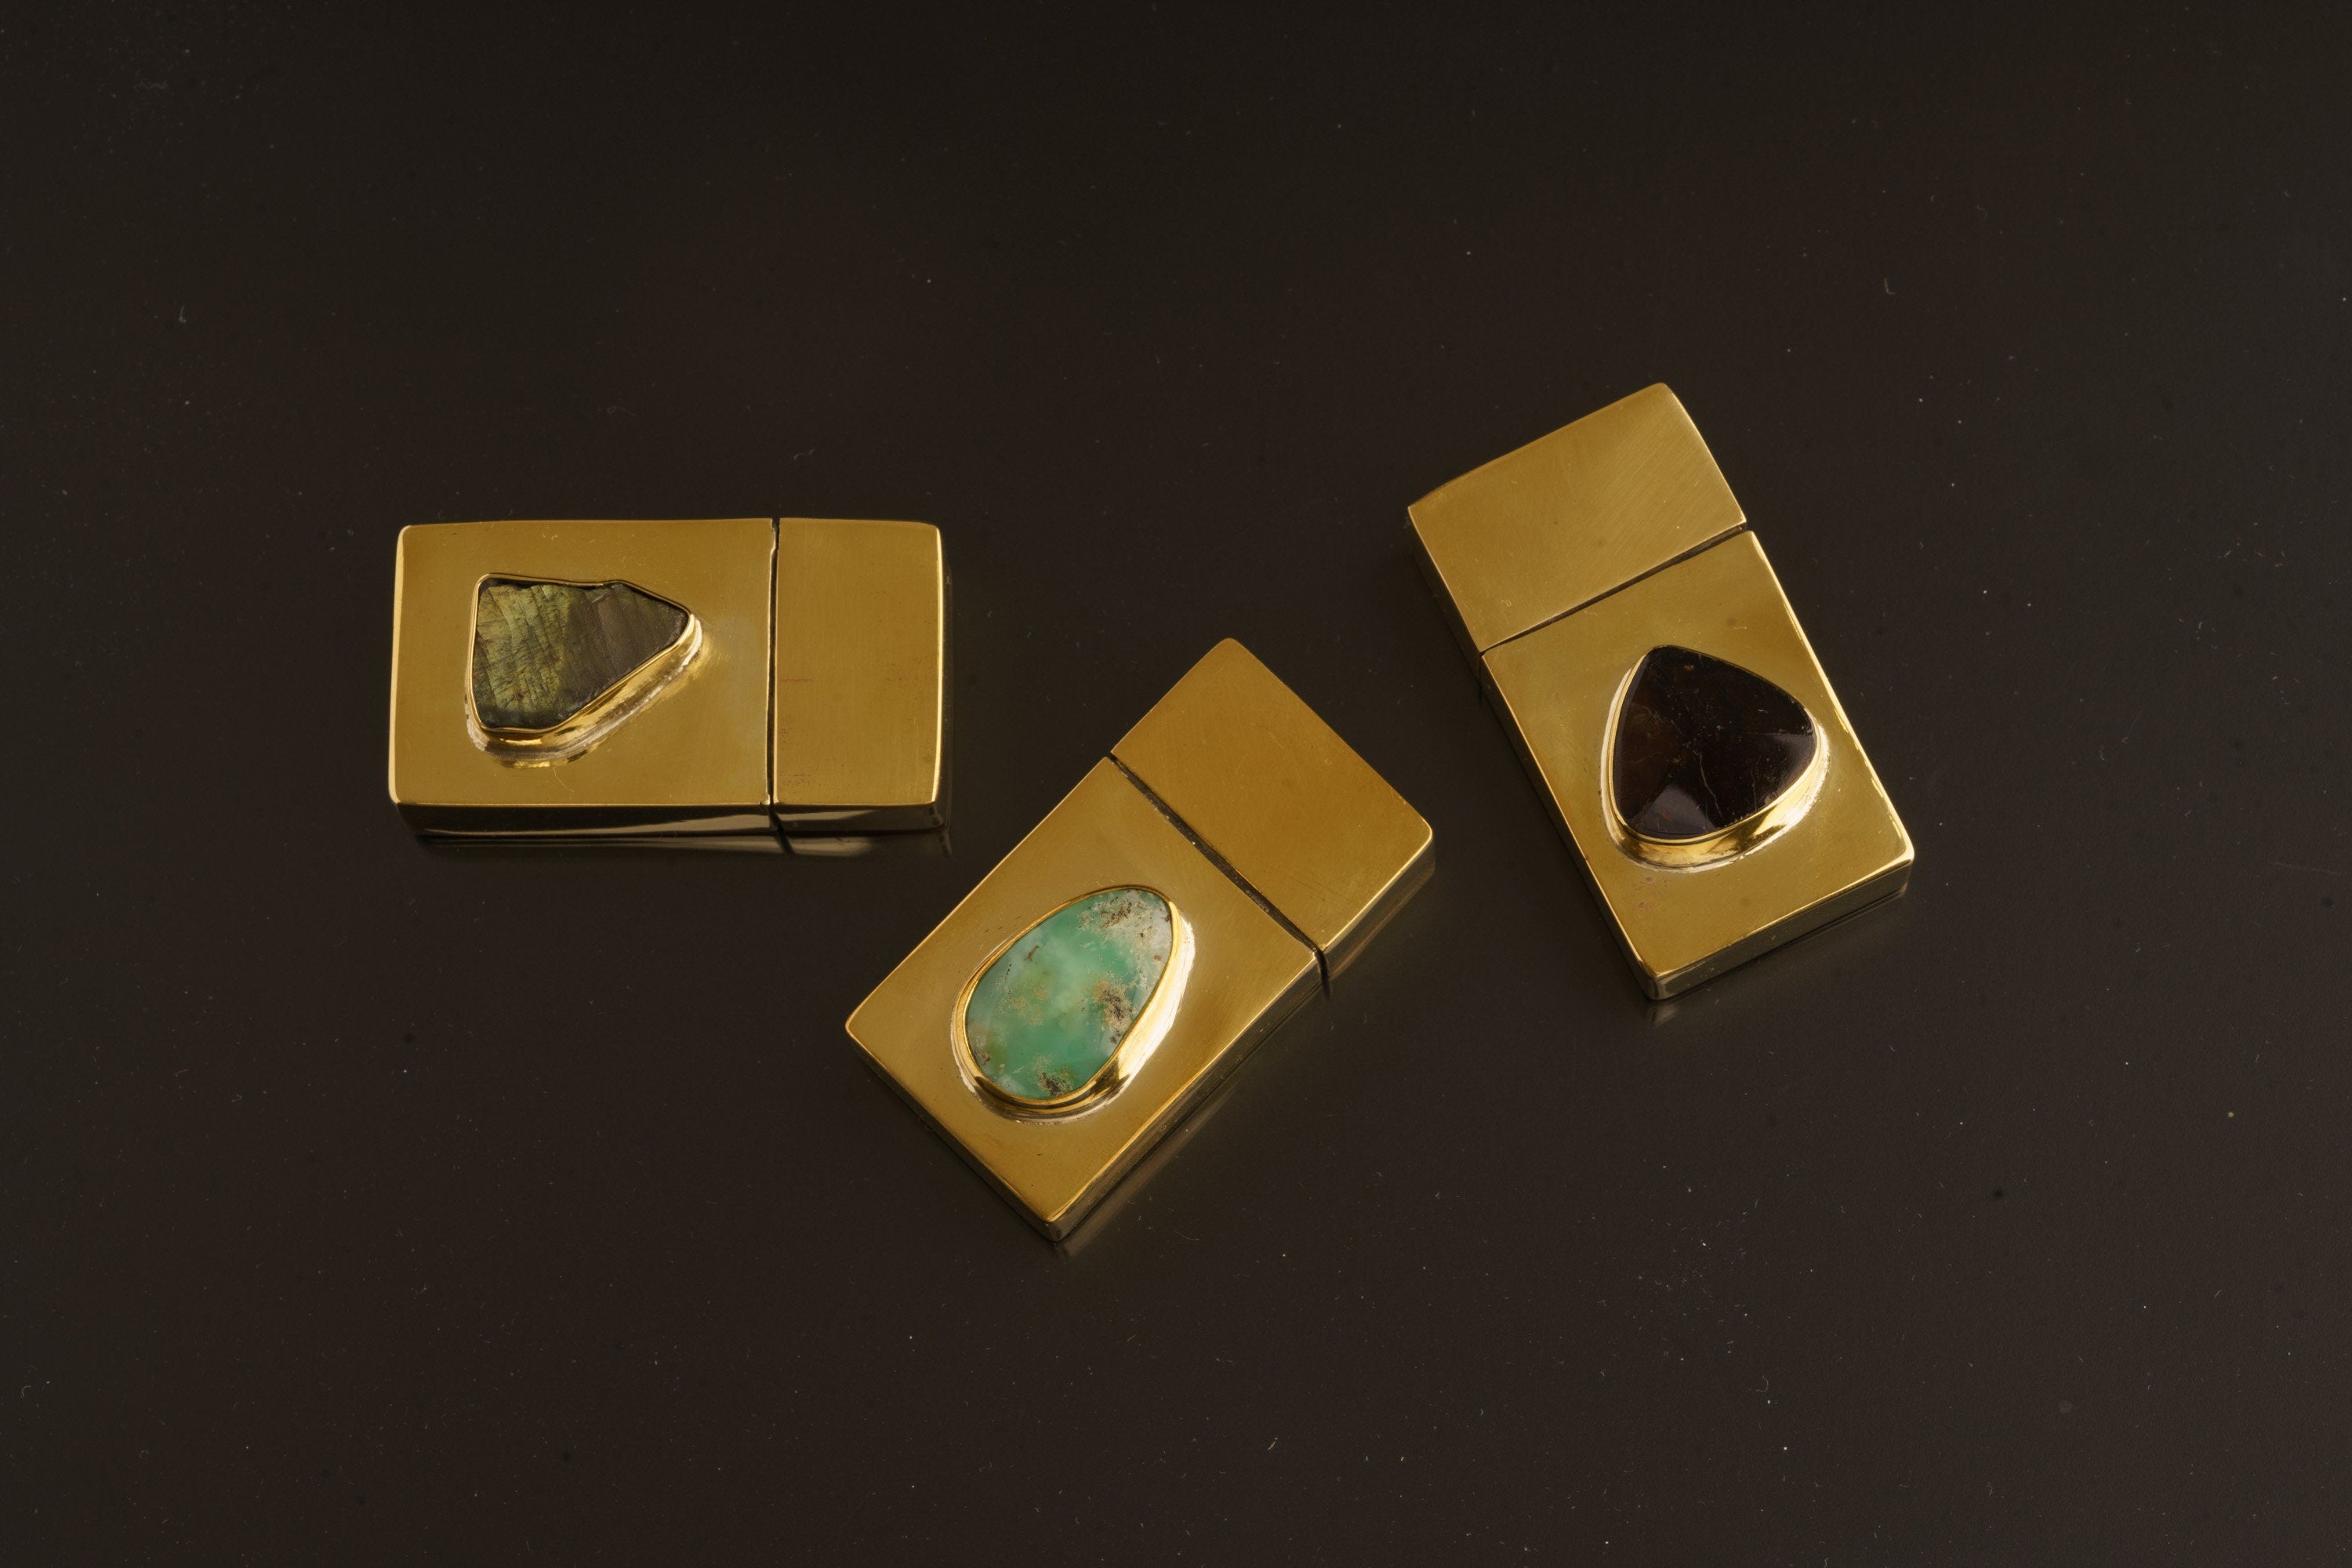 A Medley of Functionality and Natural Enchantment: Antique Matchbox adorned with Ethiopian Opal - Polished Cast Brass Matchbox